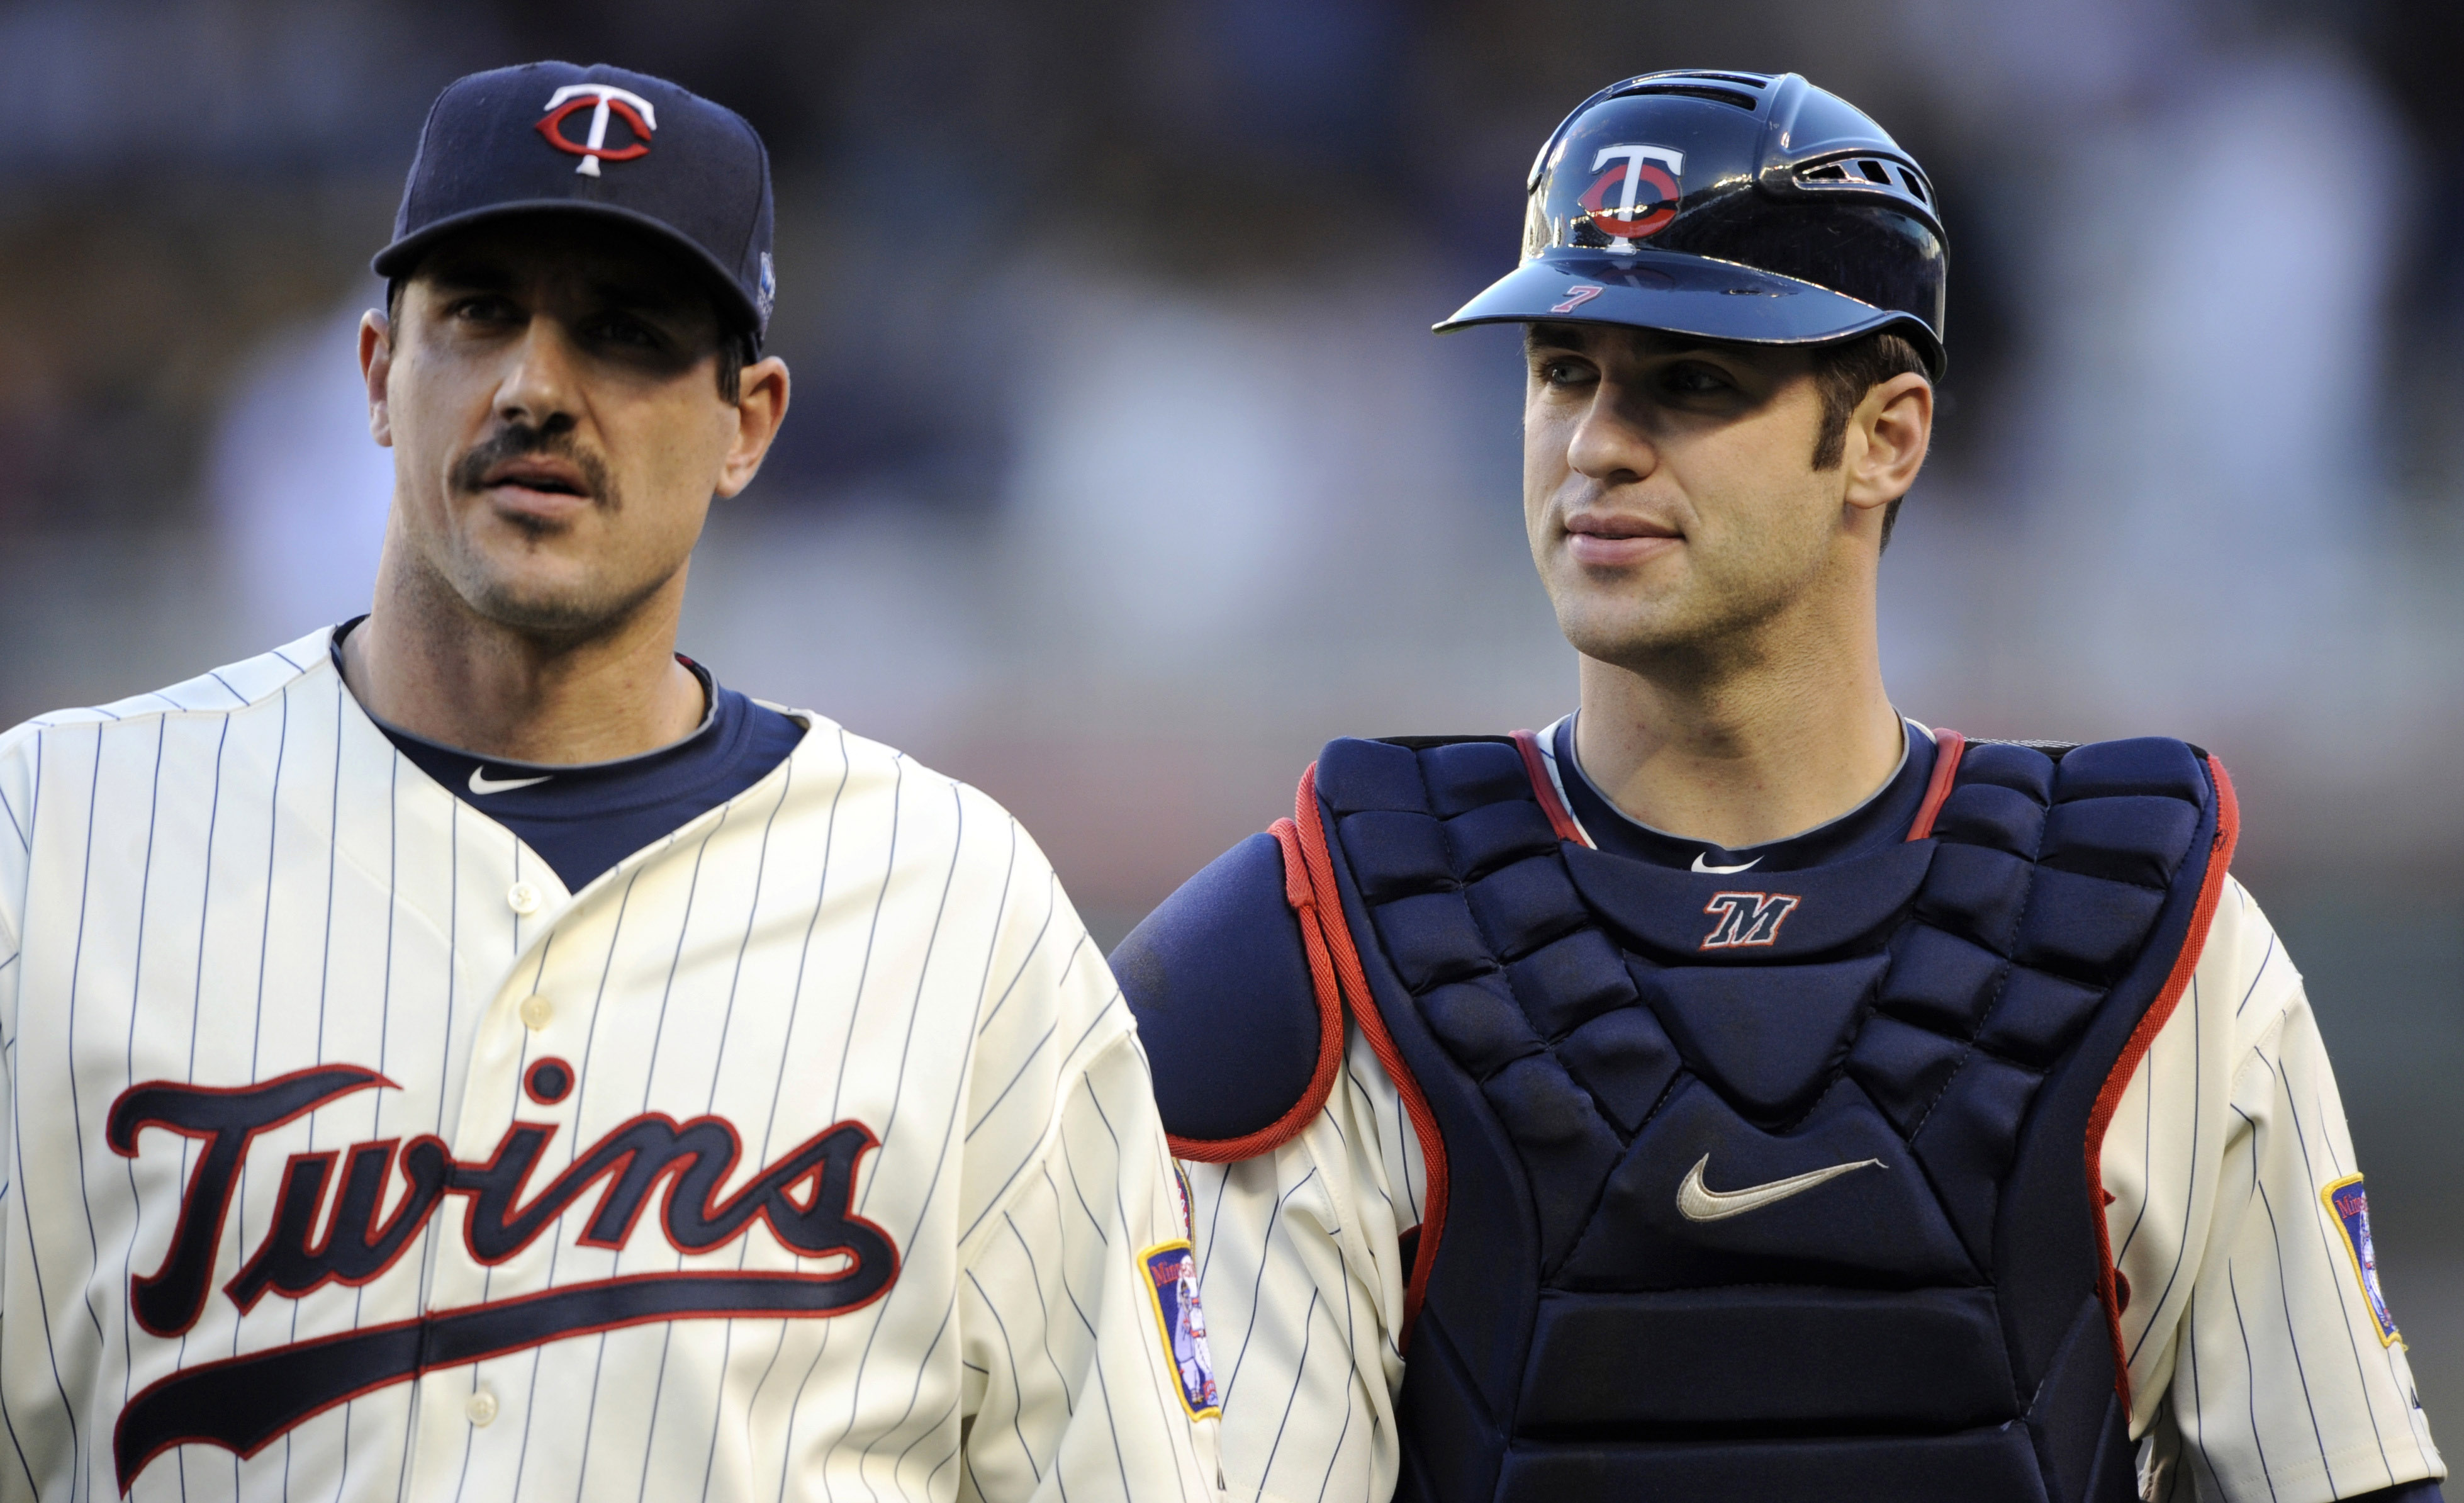 MINNEAPOLIS, MN - OCTOBER 7: Starting pitcher Carl Pavano #48 and catcher Joe Mauer #7 of the Minnesota Twins walk to the dugout prior to game two of the ALDS game against the New York Yankees on October 7, 2010 at Target Field in Minneapolis, Minnesota. 